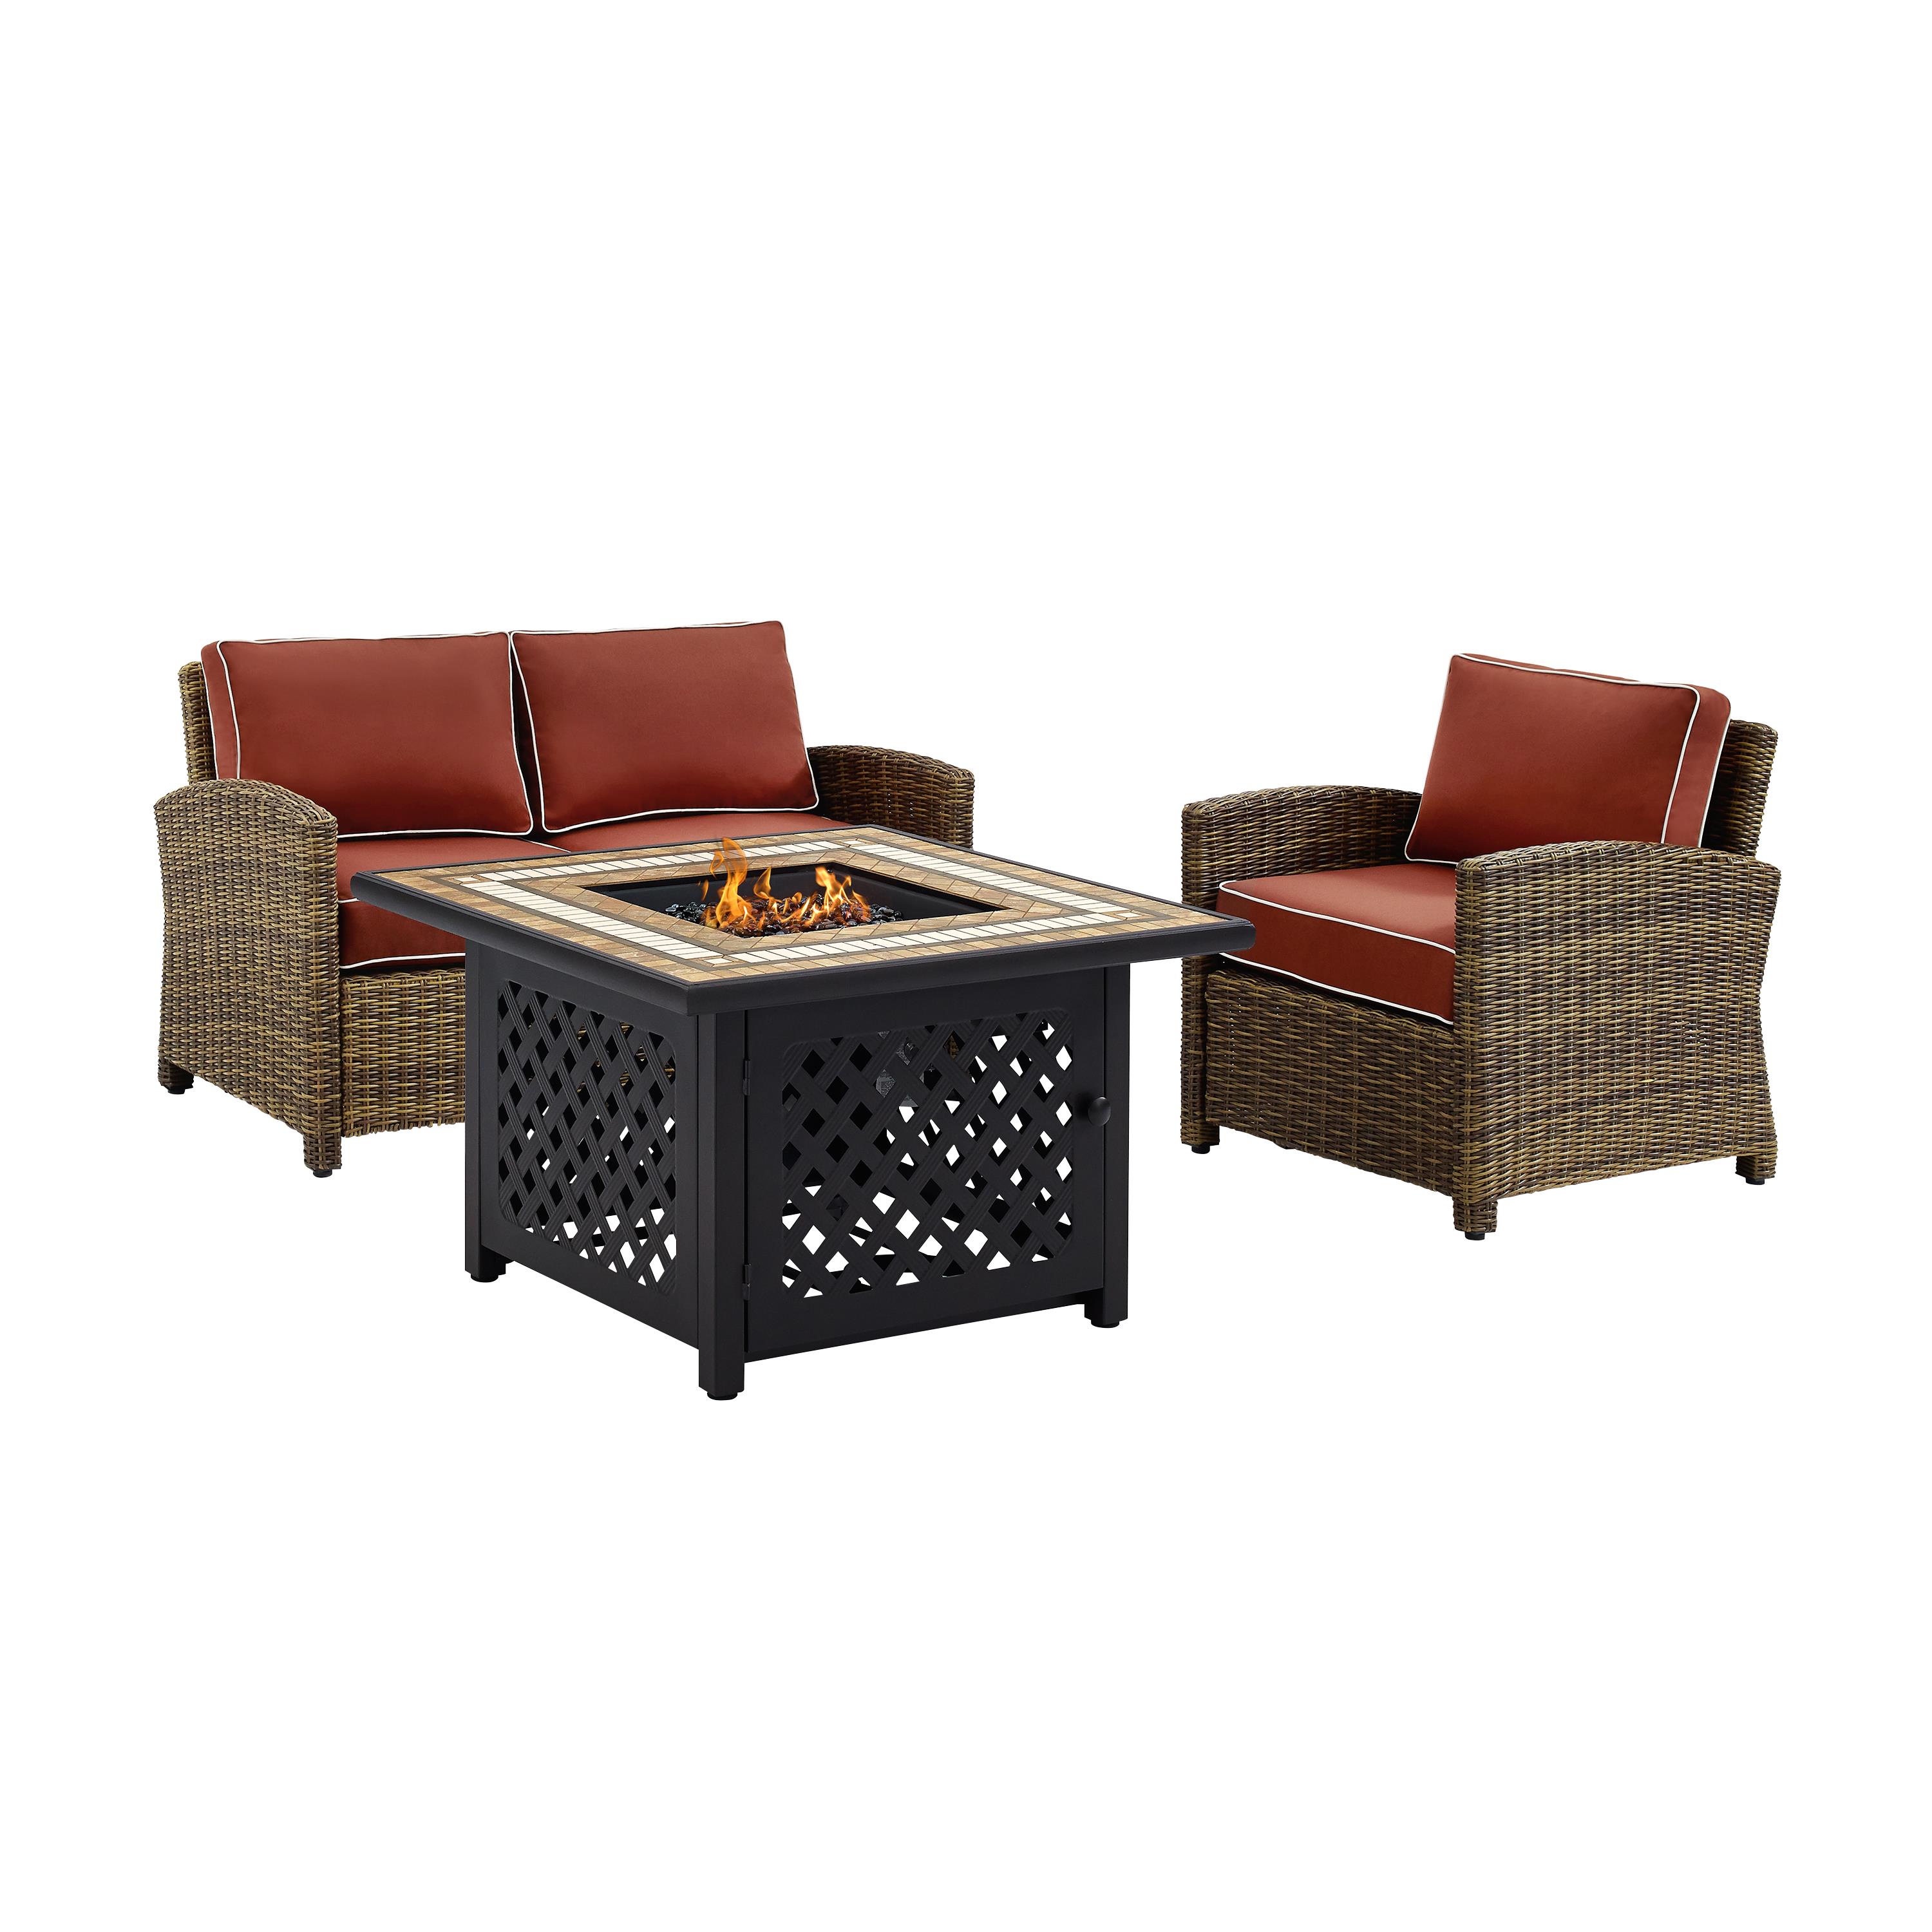 Crosley Furniture Bradenton 3Pc Patio Fabric Fire Pit Sofa Set in Brown/Red - image 5 of 9